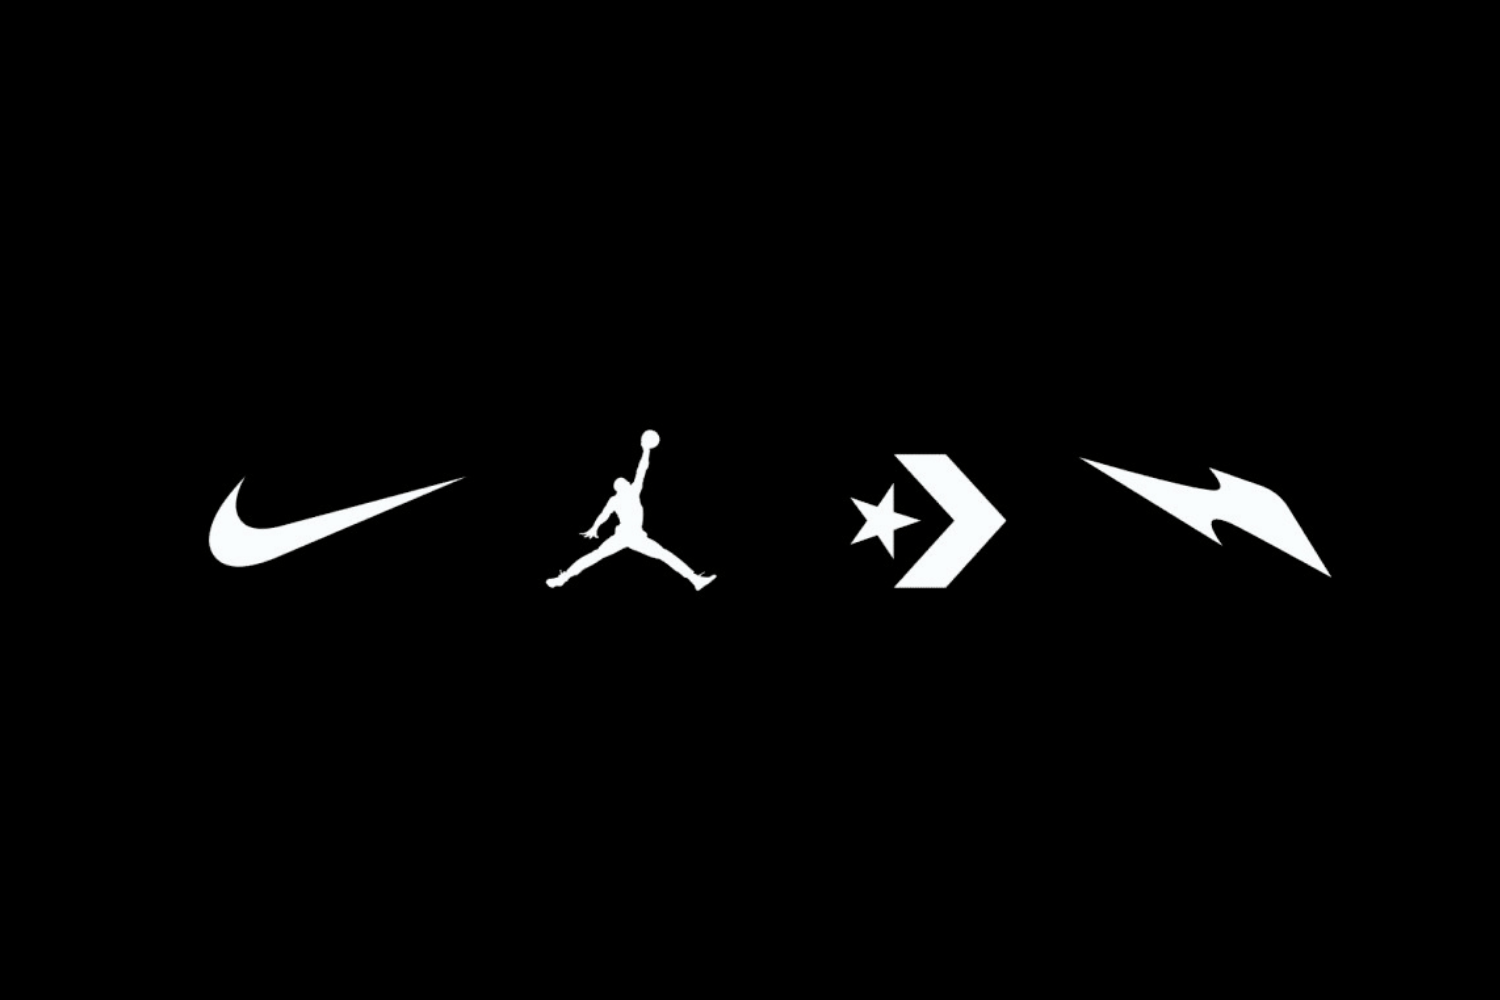 Nike acquires NFT Collectibles brand RTFKT